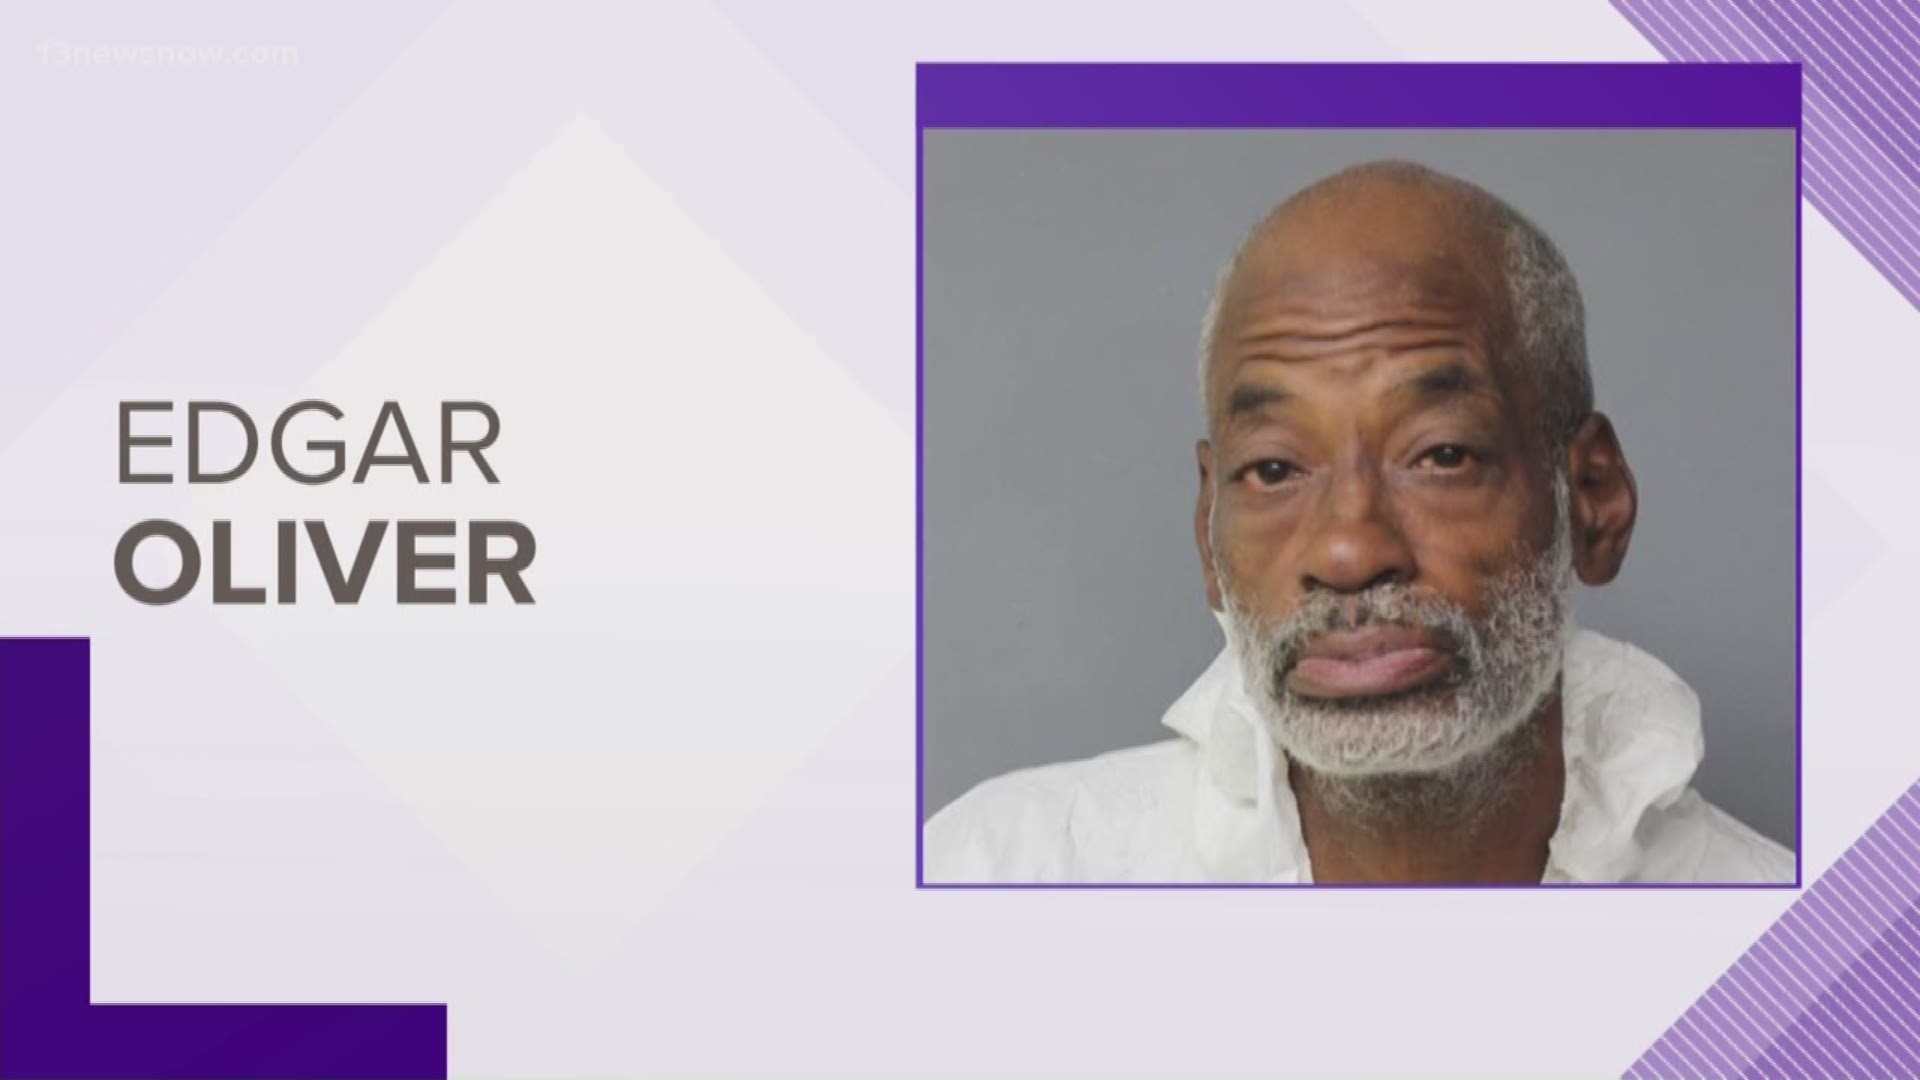 Norfolk police arrested 61-year-old Edgar Oliver for the deadly stabbing in Norfolk Thursday. He's charged with second-degree murder.